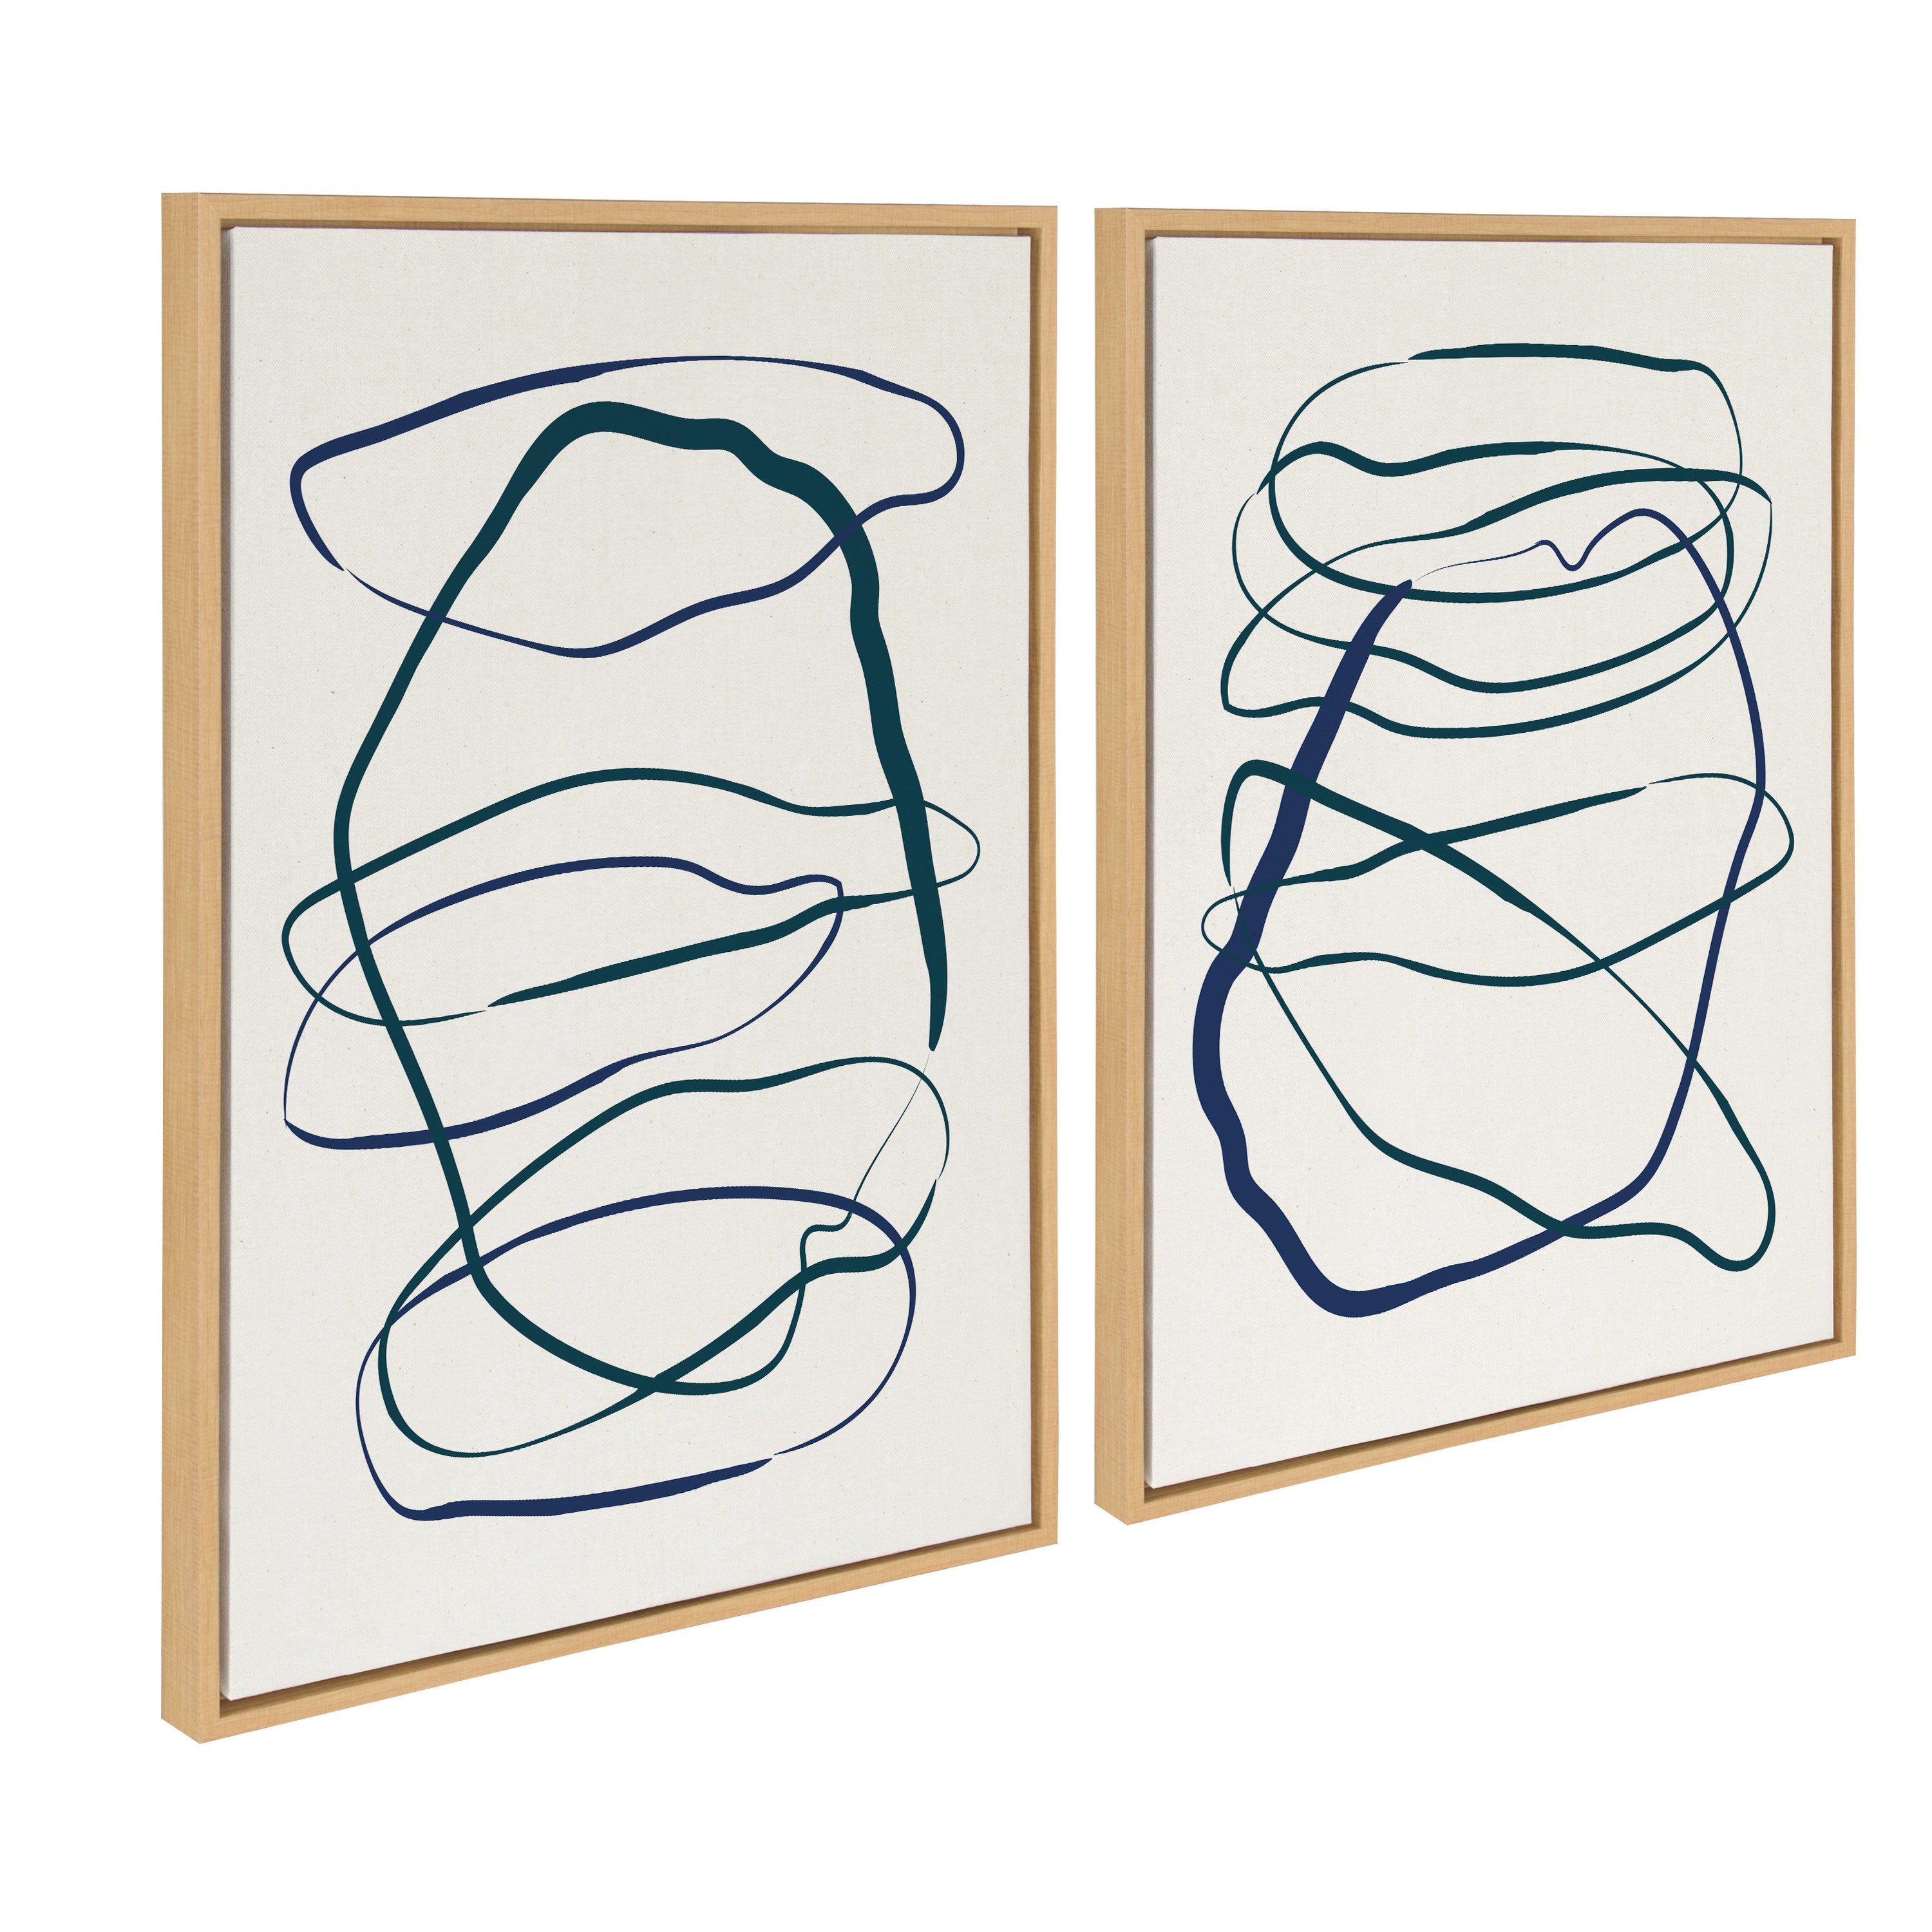 Sylvie Blue and Green Expressive Abstract 1 and 2 Framed Canvas Art Set by The Creative Bunch Studio